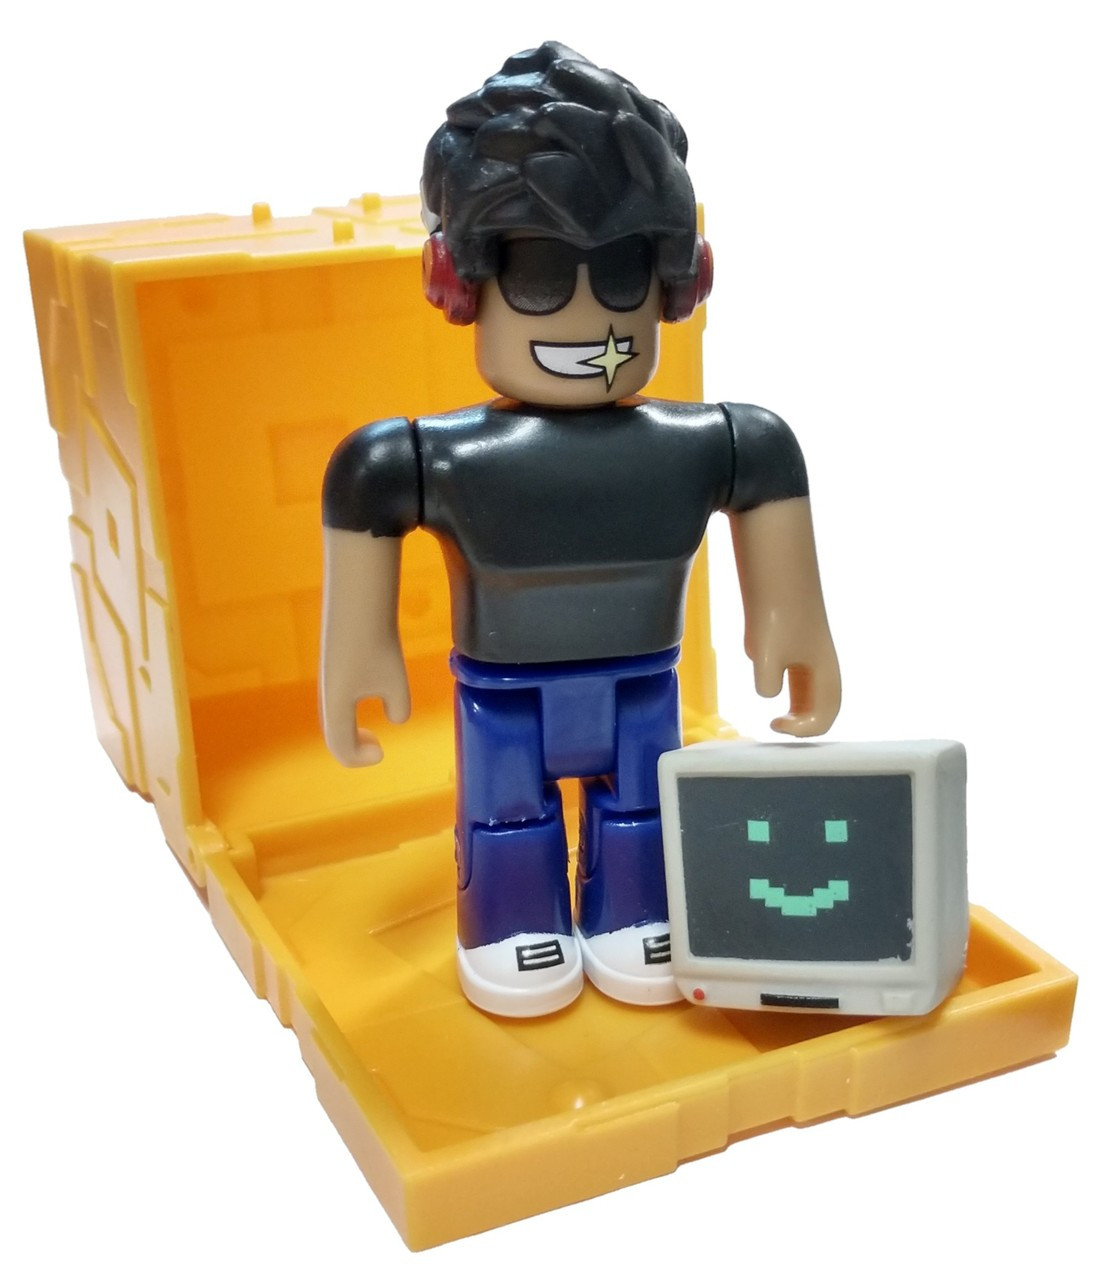 Roblox Series 5 Simbuilder 3 Mini Figure With Gold Cube And Online Code Loose Jazwares Toywiz - simbuilder roblox mini figure with virtual game code series